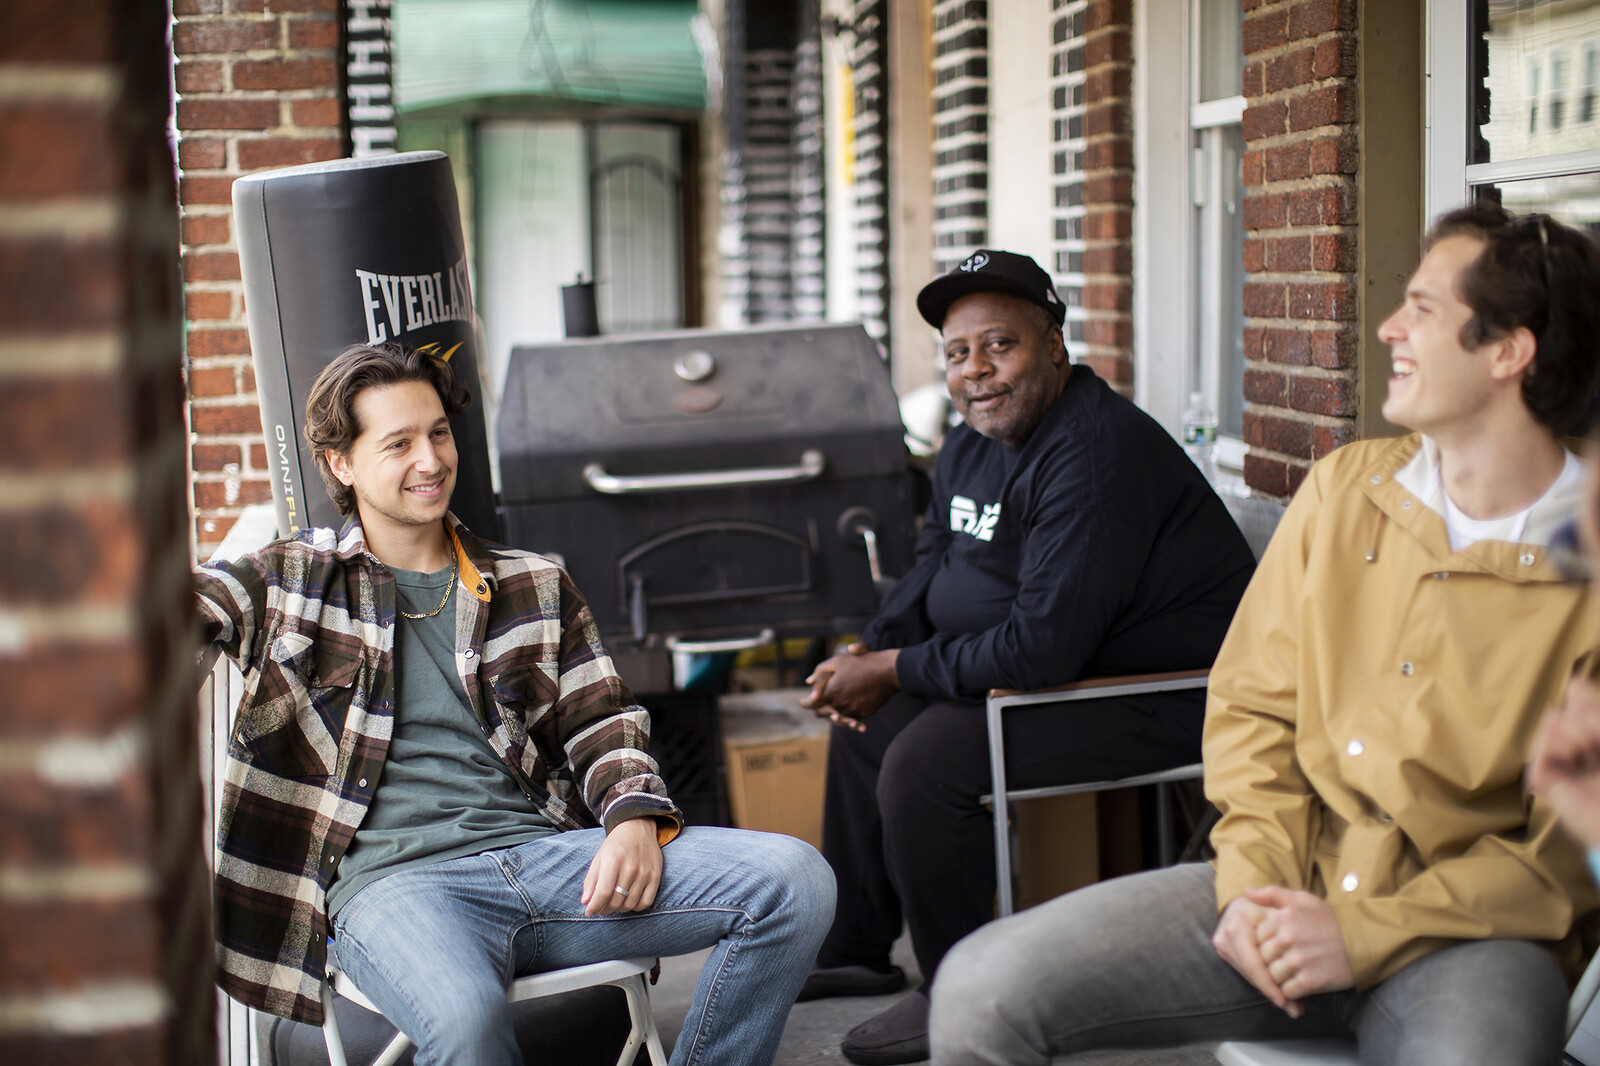 Community Grocer founders Eli Moraru and Alexandre Imbot sitting on a West Philly porch with community activist Charles Reeves